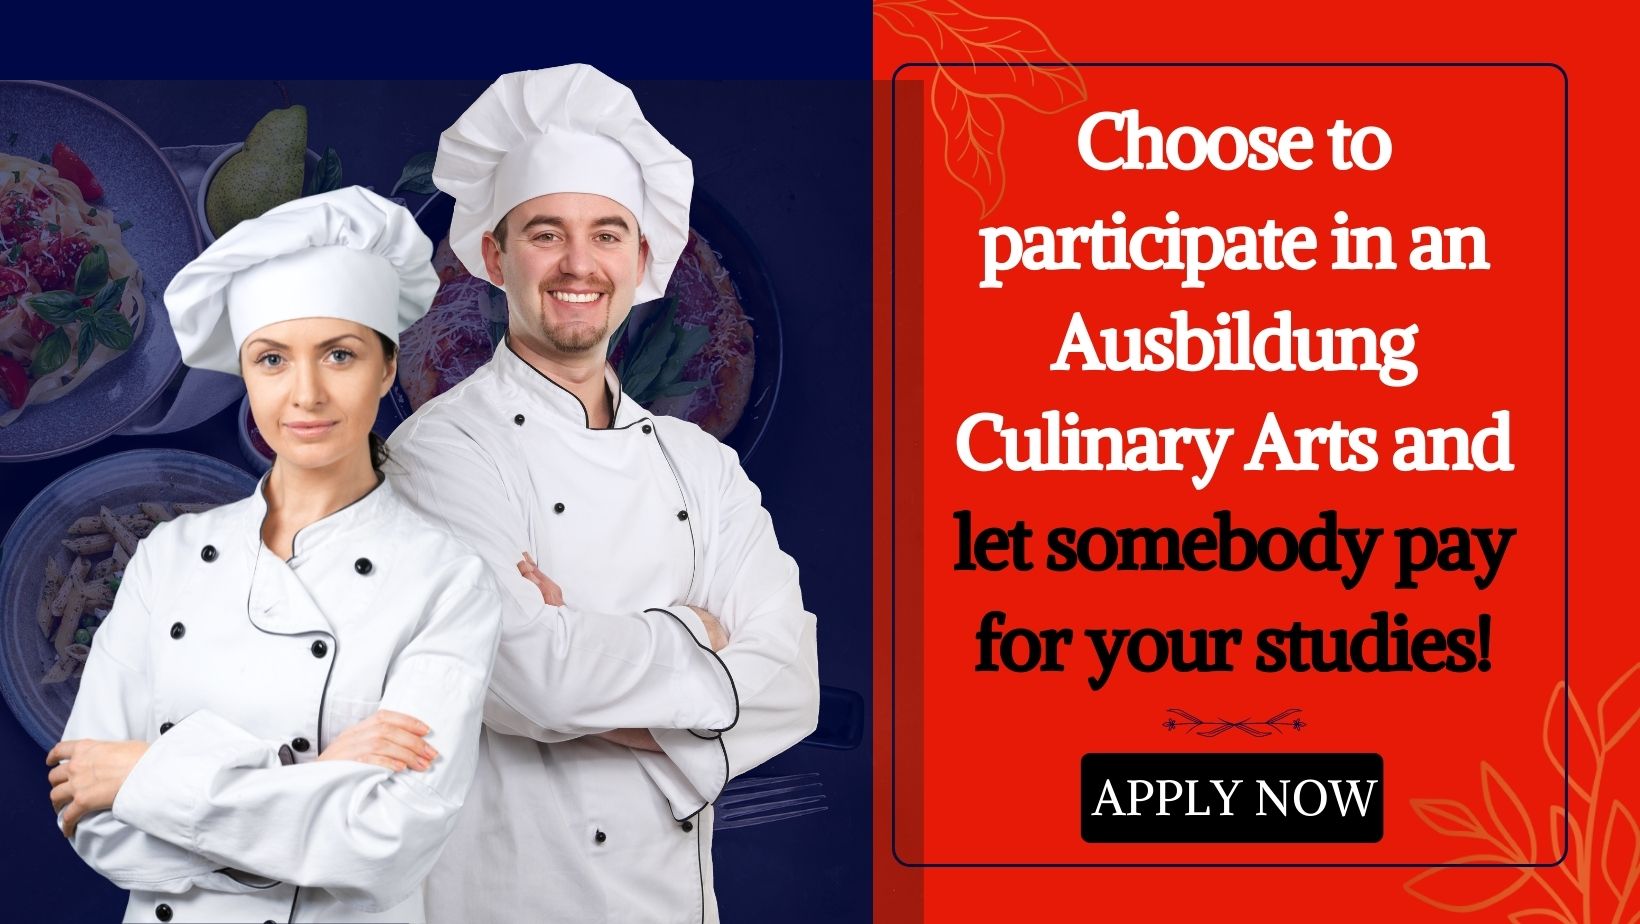 The cost of the Ausbildung Culinary Arts programme in Germany